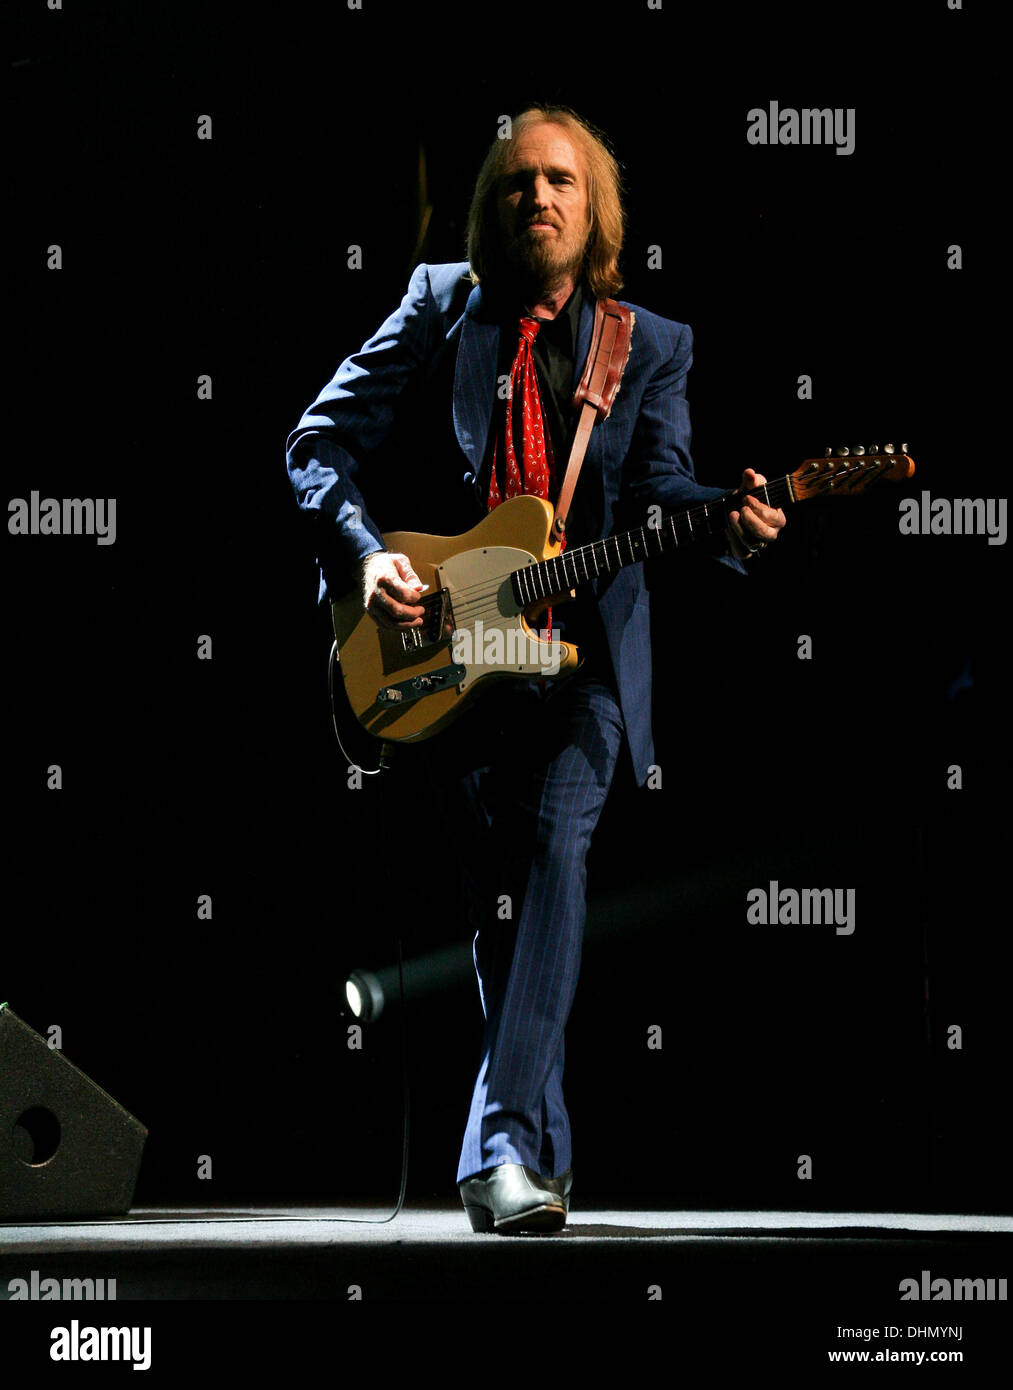 Tom Petty and The Heartbreakers performing at the Amway Center  Orlando, Florida - 03.05.12 Stock Photo